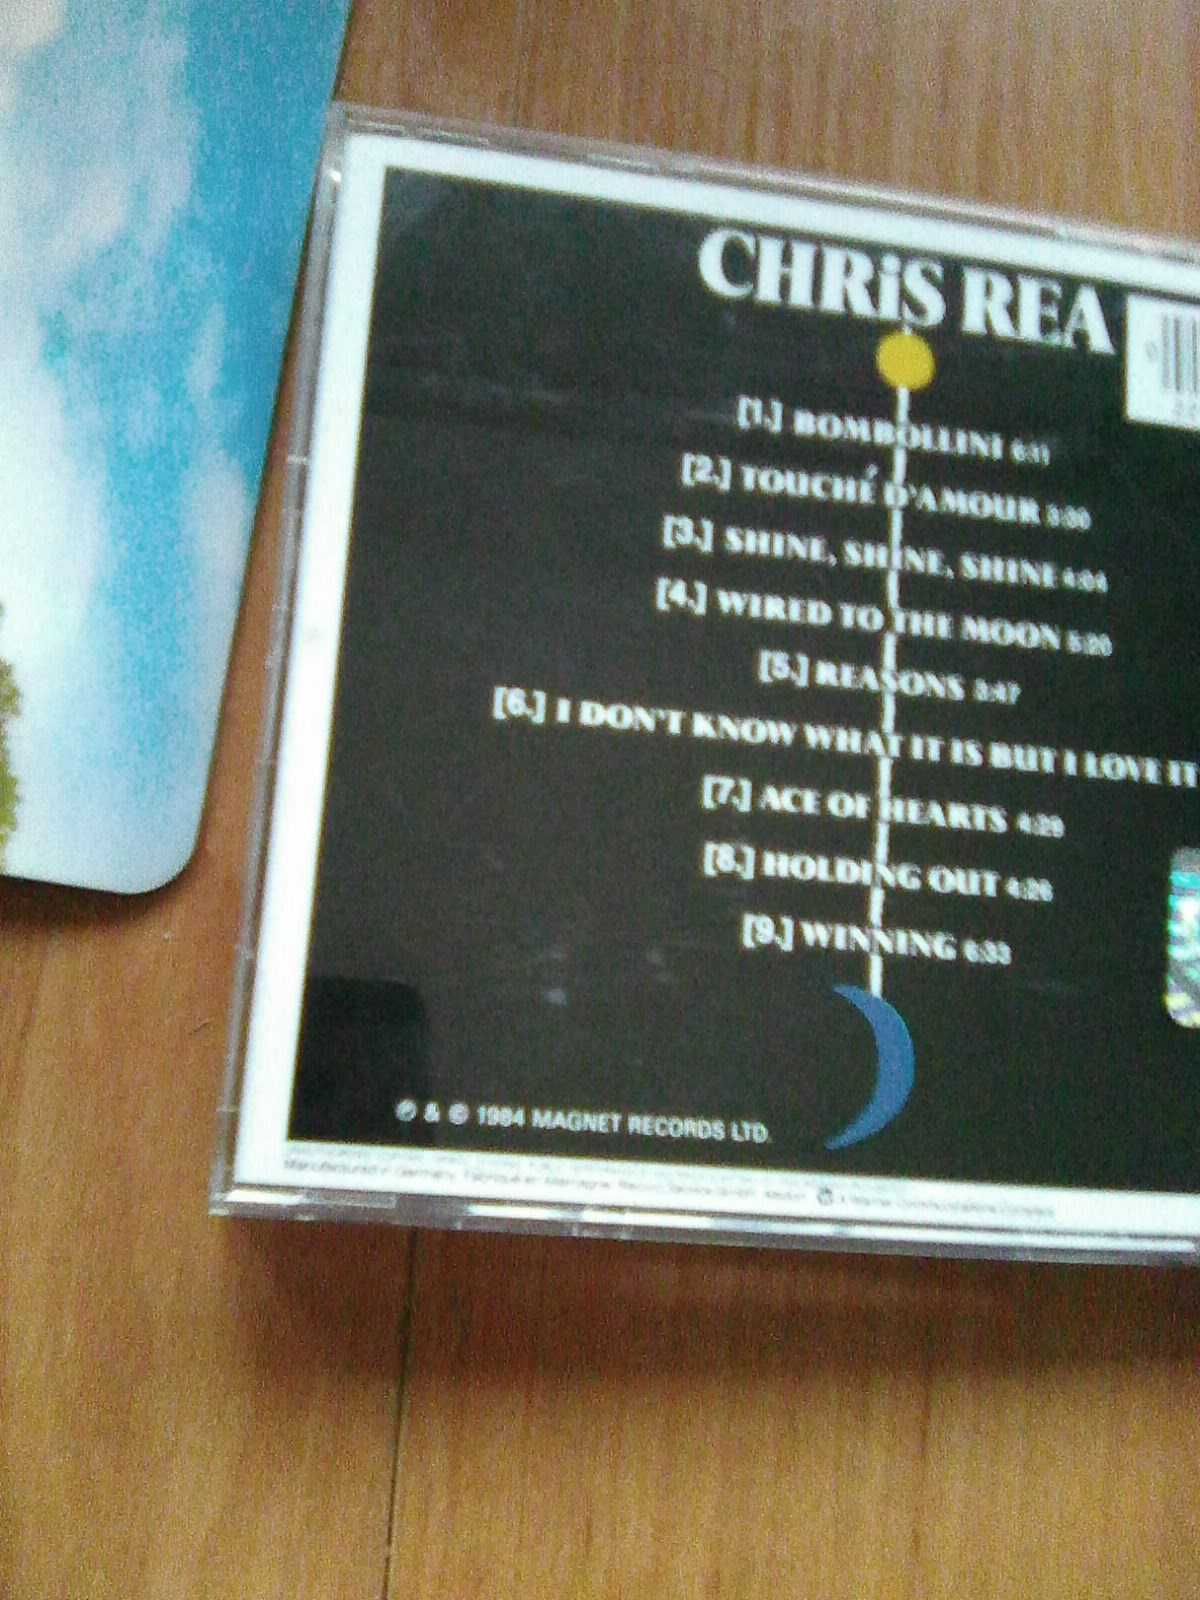 Chris Rea Wired To The Moon